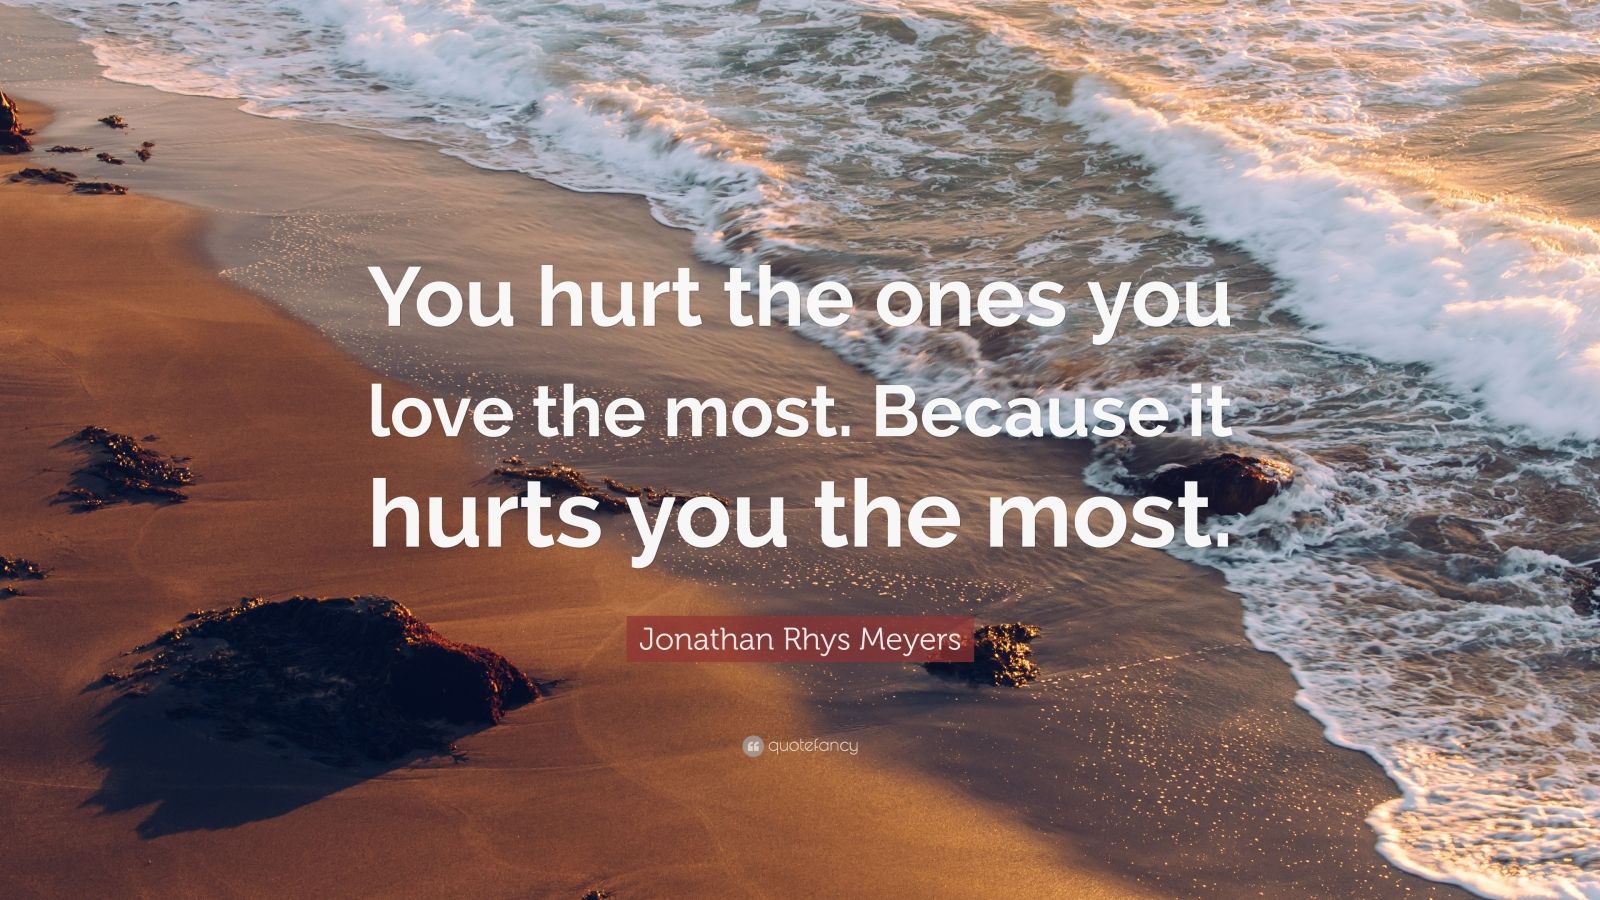 Jonathan Rhys Meyers Quote: “You hurt the ones you love the most ...